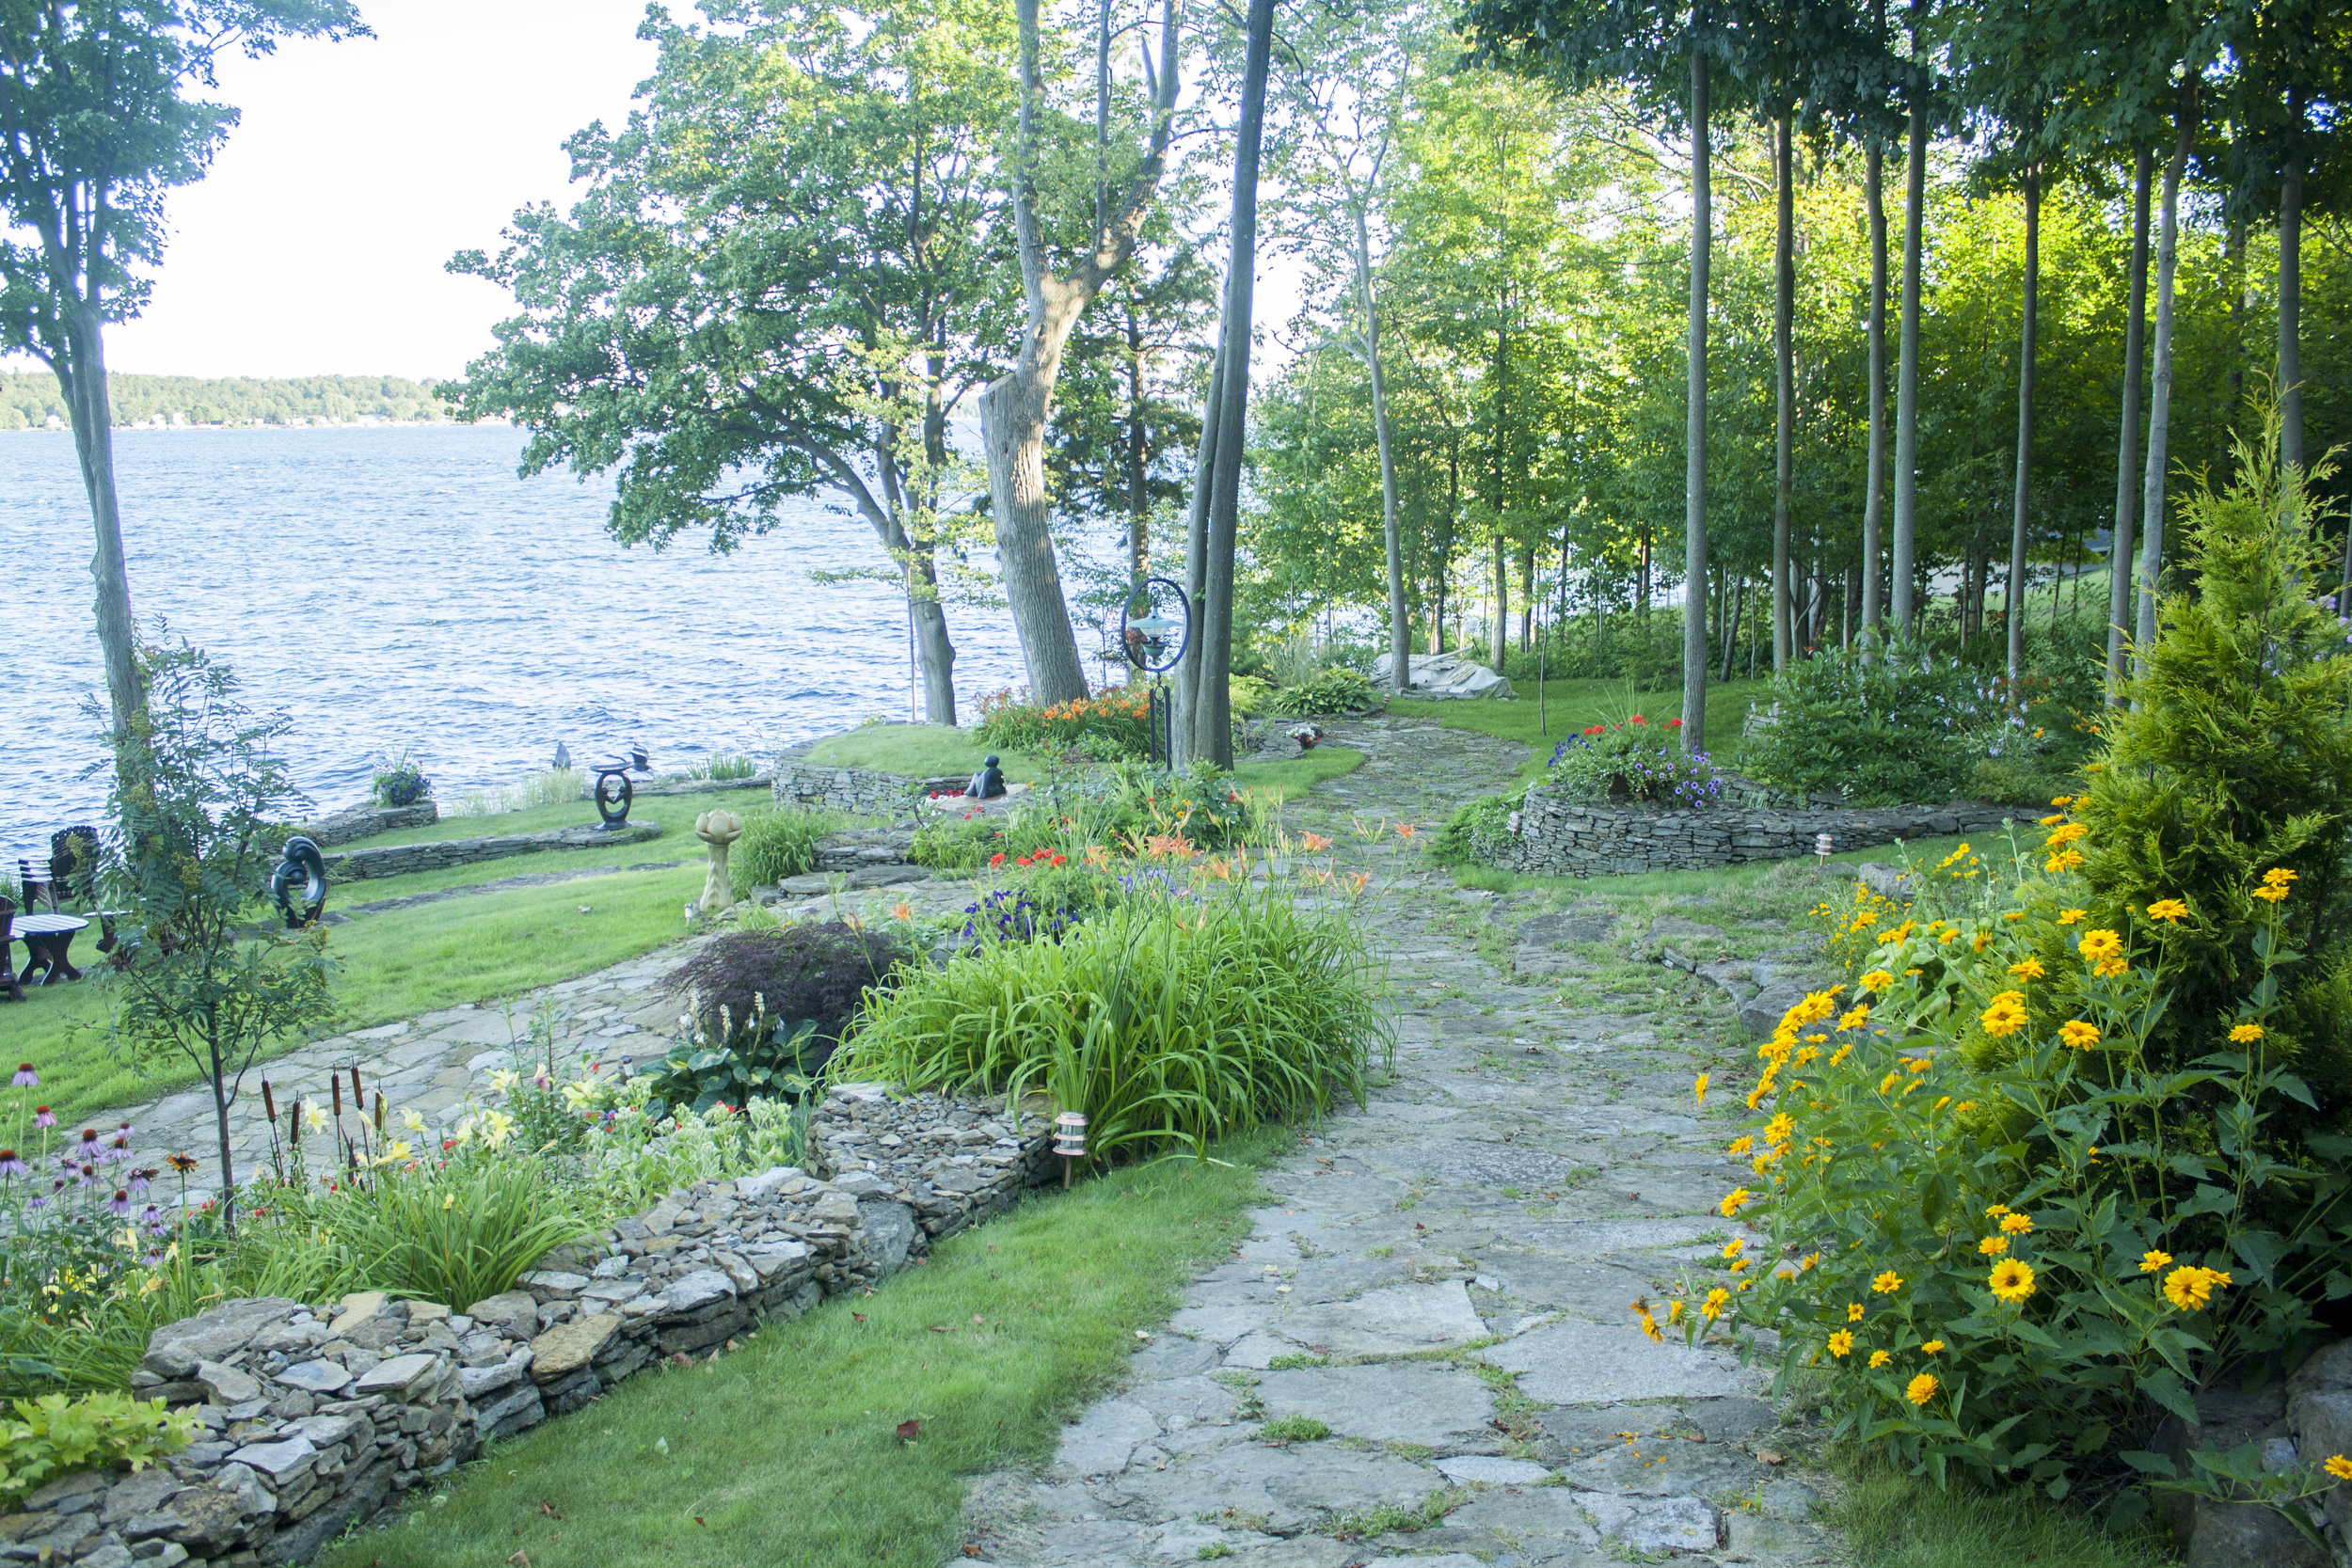 Landscape Design | Landscaping | Terrace Gardens | Dry Lay Stone | Waterfront Dream Home | Riverview Design Solutions | Prescott, Ontario, Canada